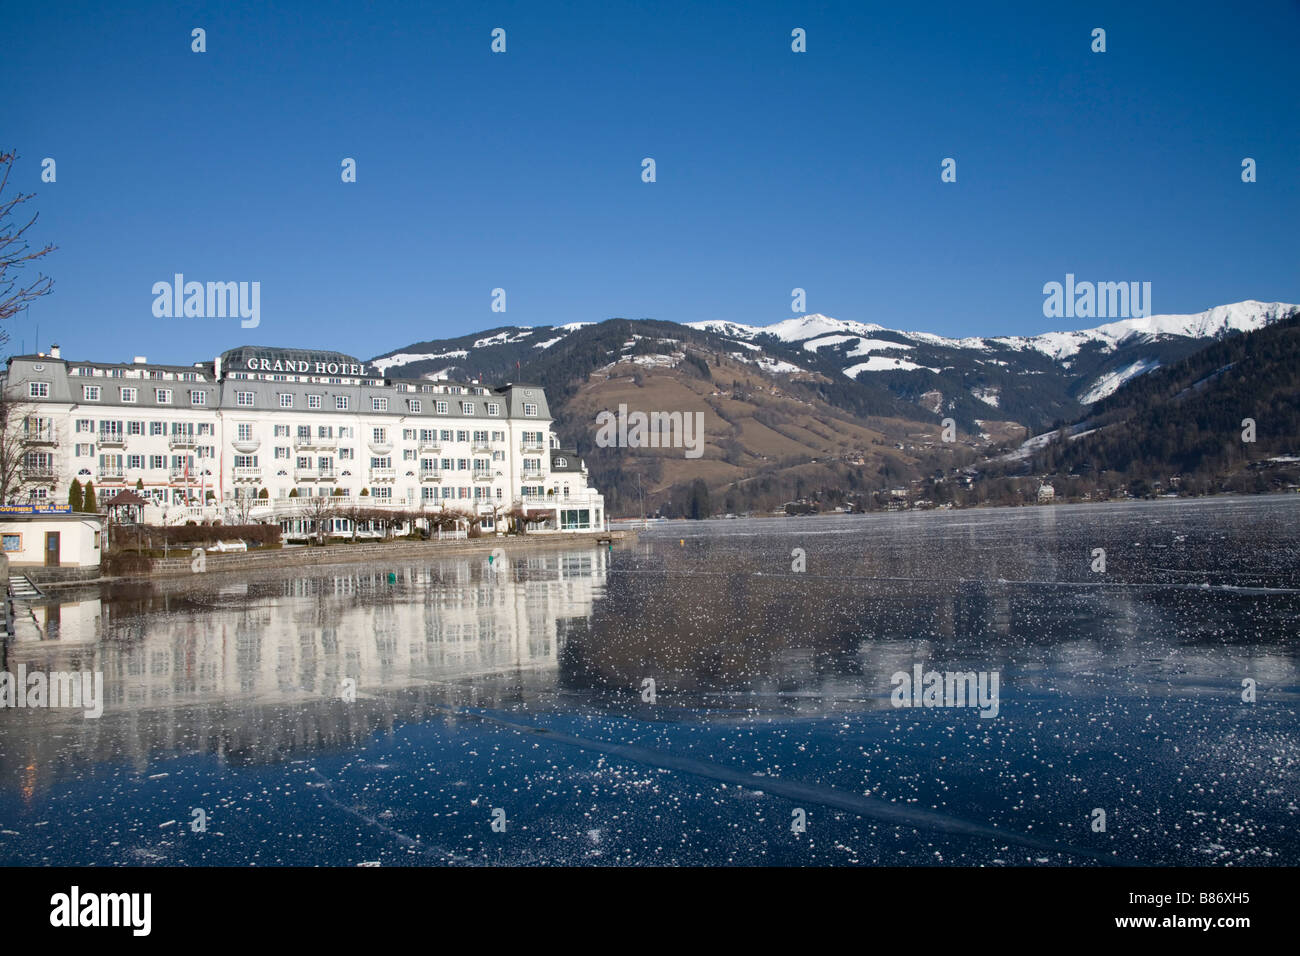 Zell am See Austria EU January View across the frozen Zeller See lake towards the Thumersbach area on the opposite bank Stock Photo